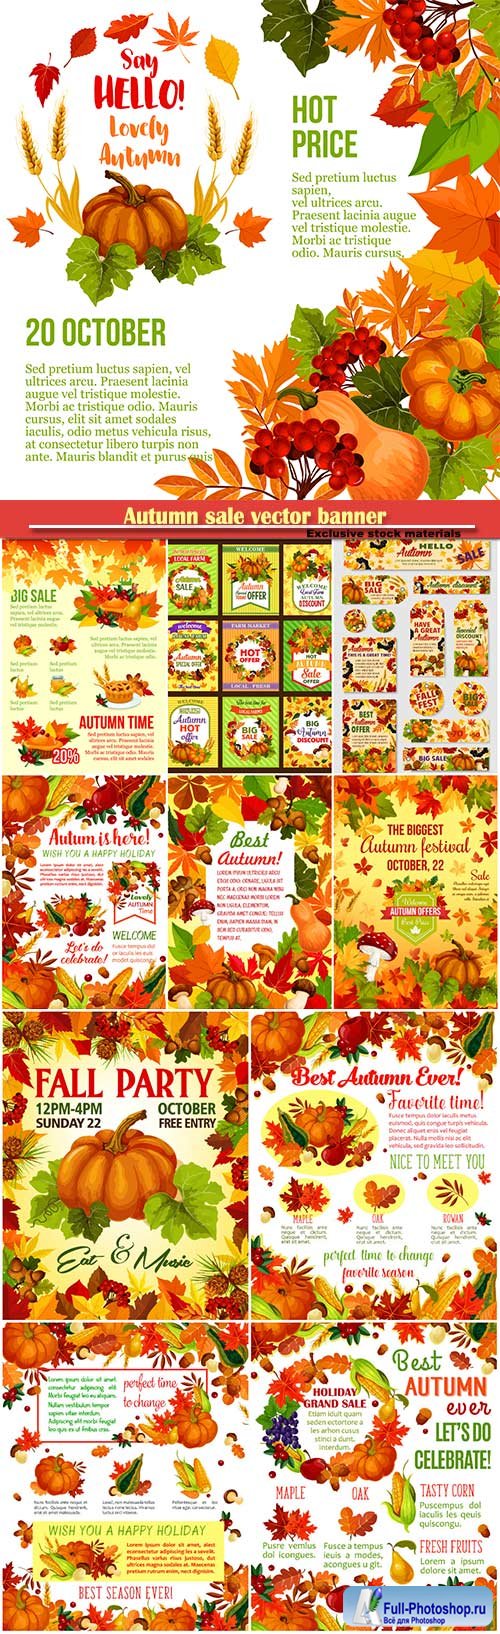 Autumn sale vector banner with fall harvest vegetable, fruit and leaf frame